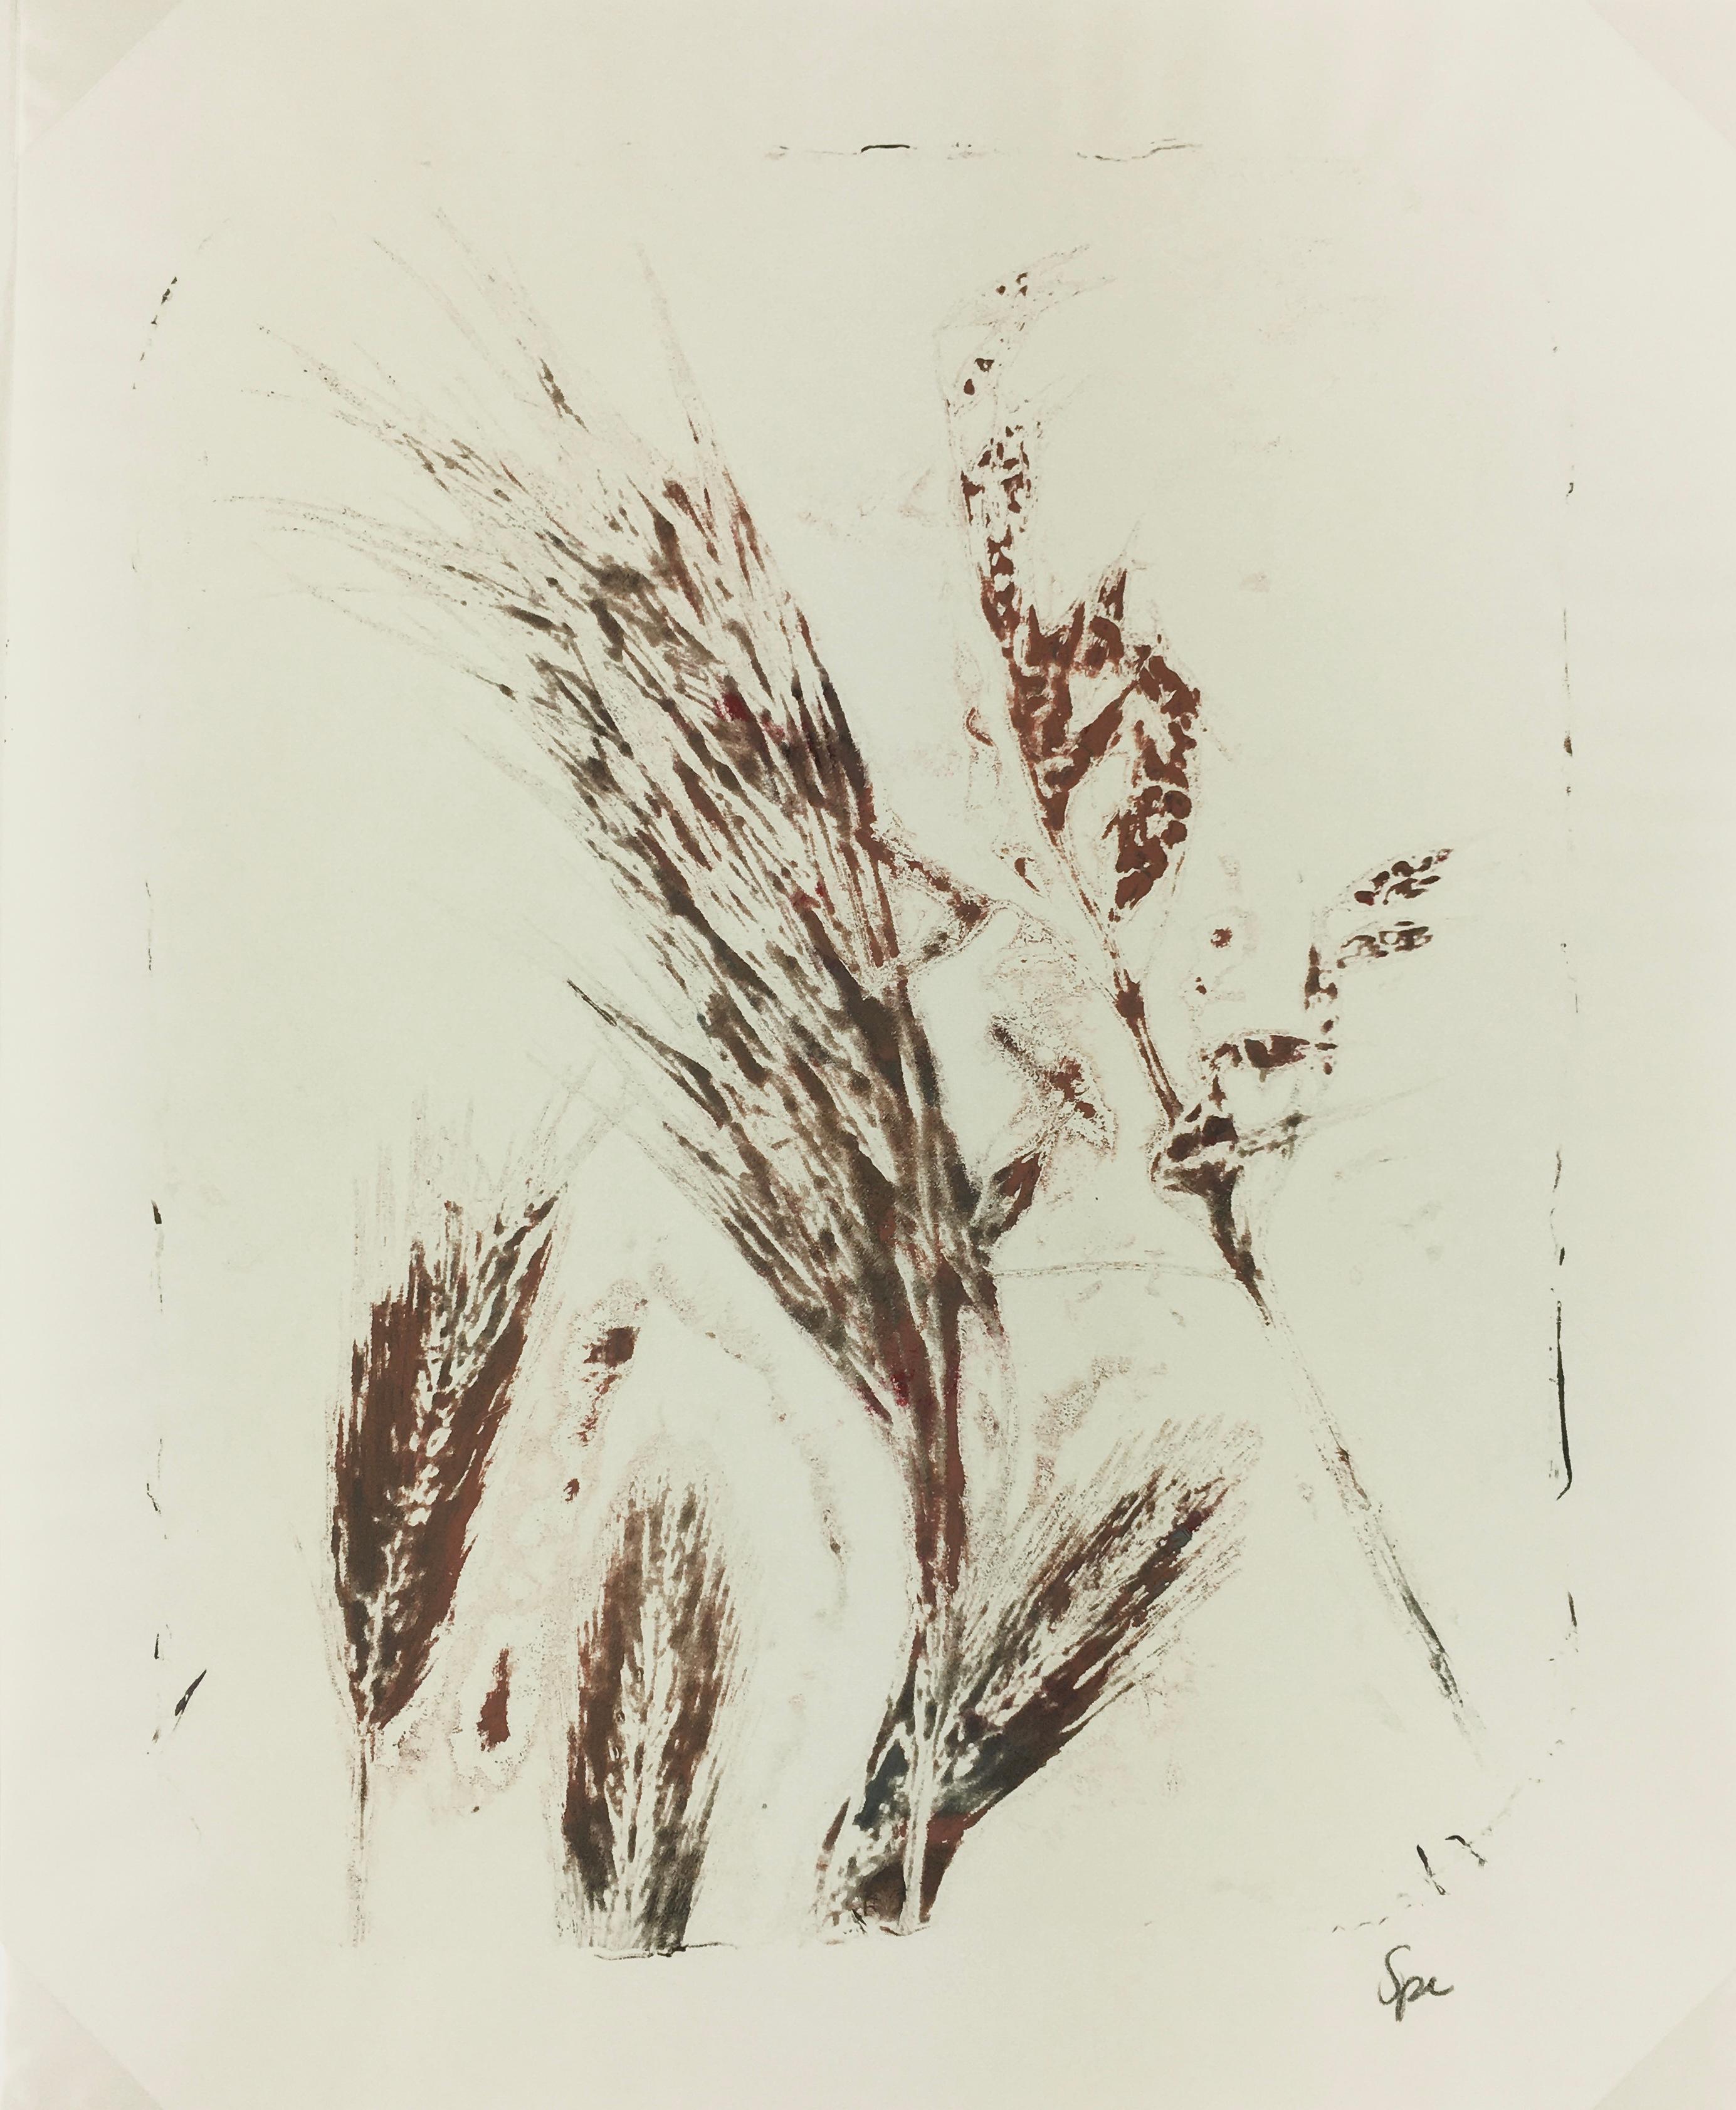 Modern abstract painting of grass and leaves in browns, grays, and reds by artist Spe, 2013. Signed lower right.  

Original artwork on paper displayed on a white mat with a gold border. Mat fits a standard-size frame.  Archival plastic sleeve and